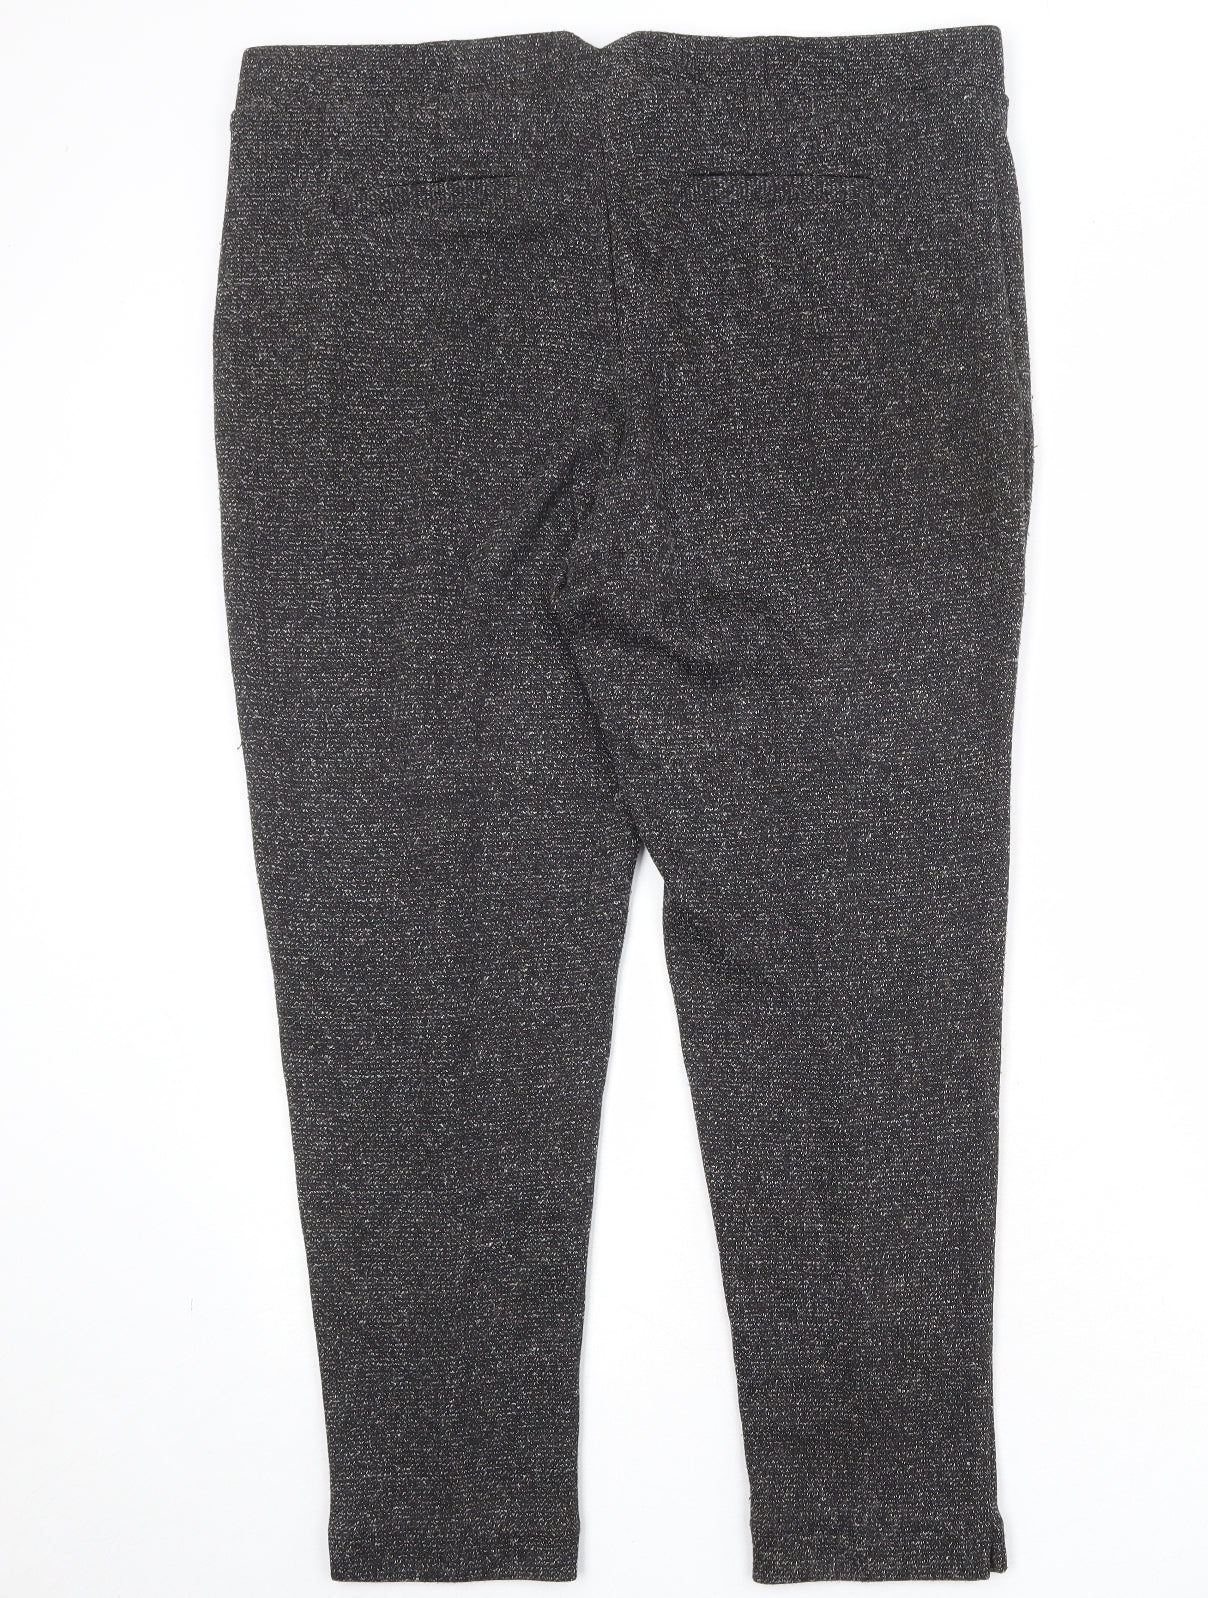 NEXT Womens Grey Polyester Trousers Size 20 Regular